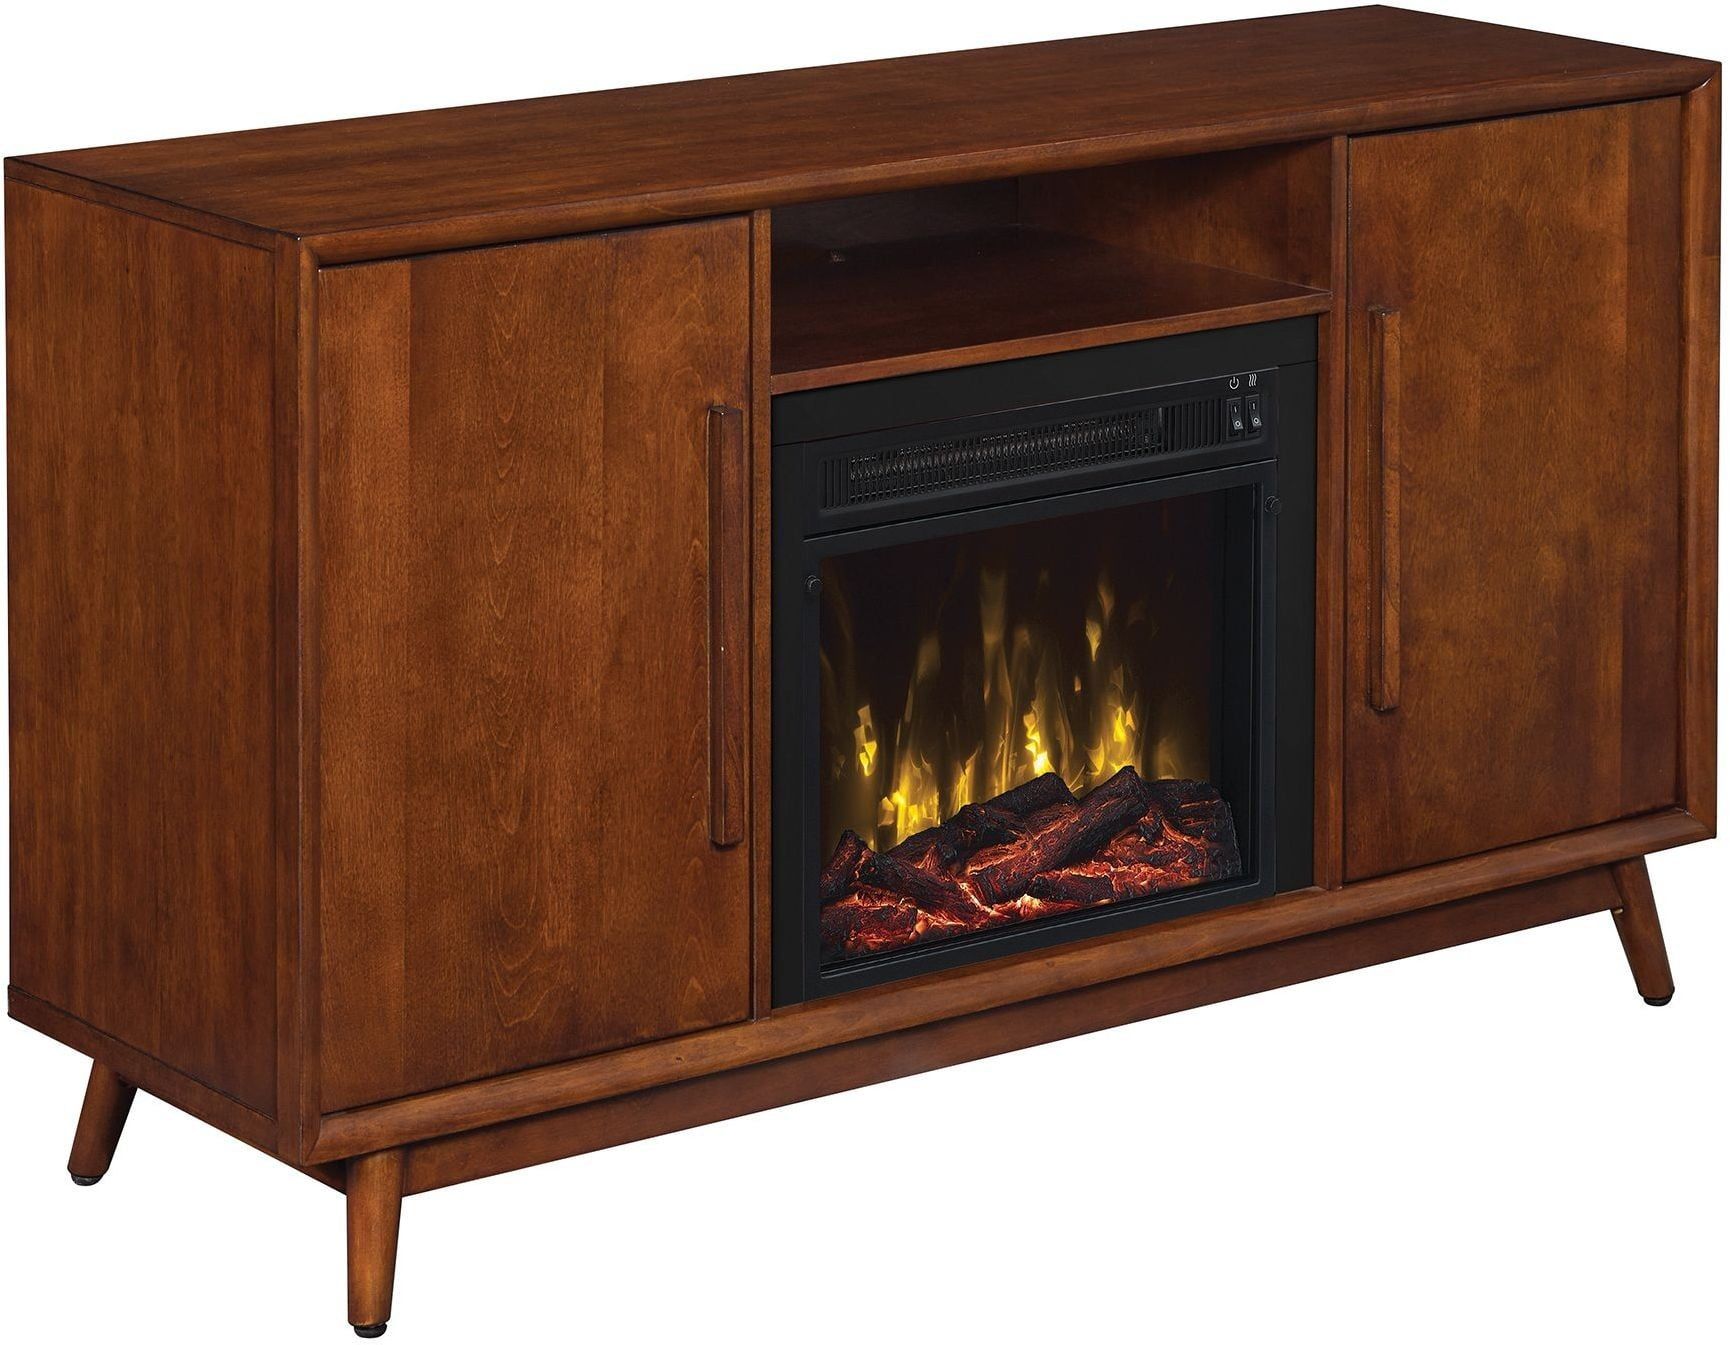 Classicflame Mahogany Cherry Leawood Tv Stand With Electric Fireplace In Tv Stands With Electric Fireplace (View 8 of 20)